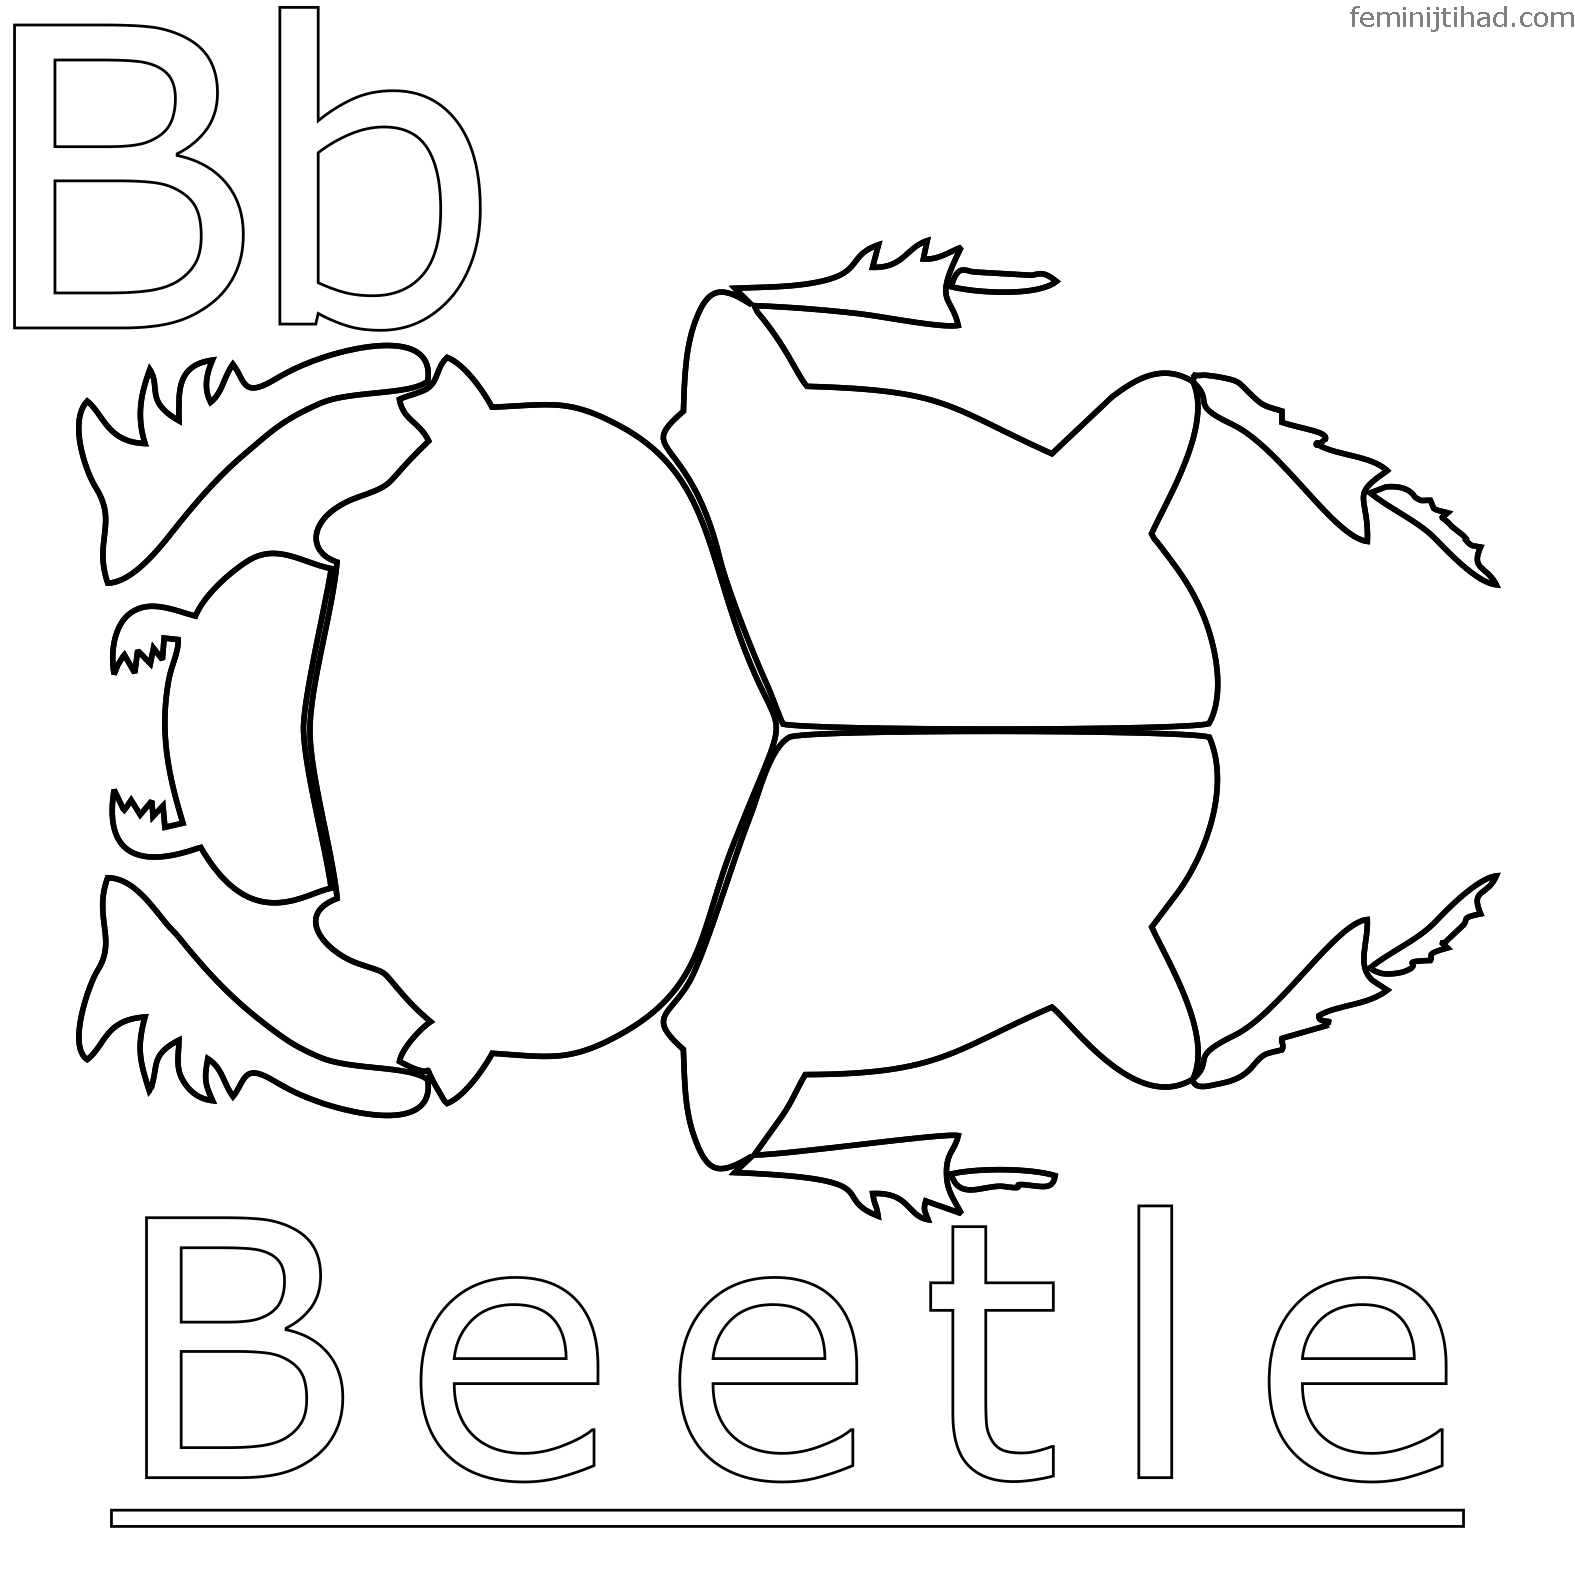 coloring page of a beetle